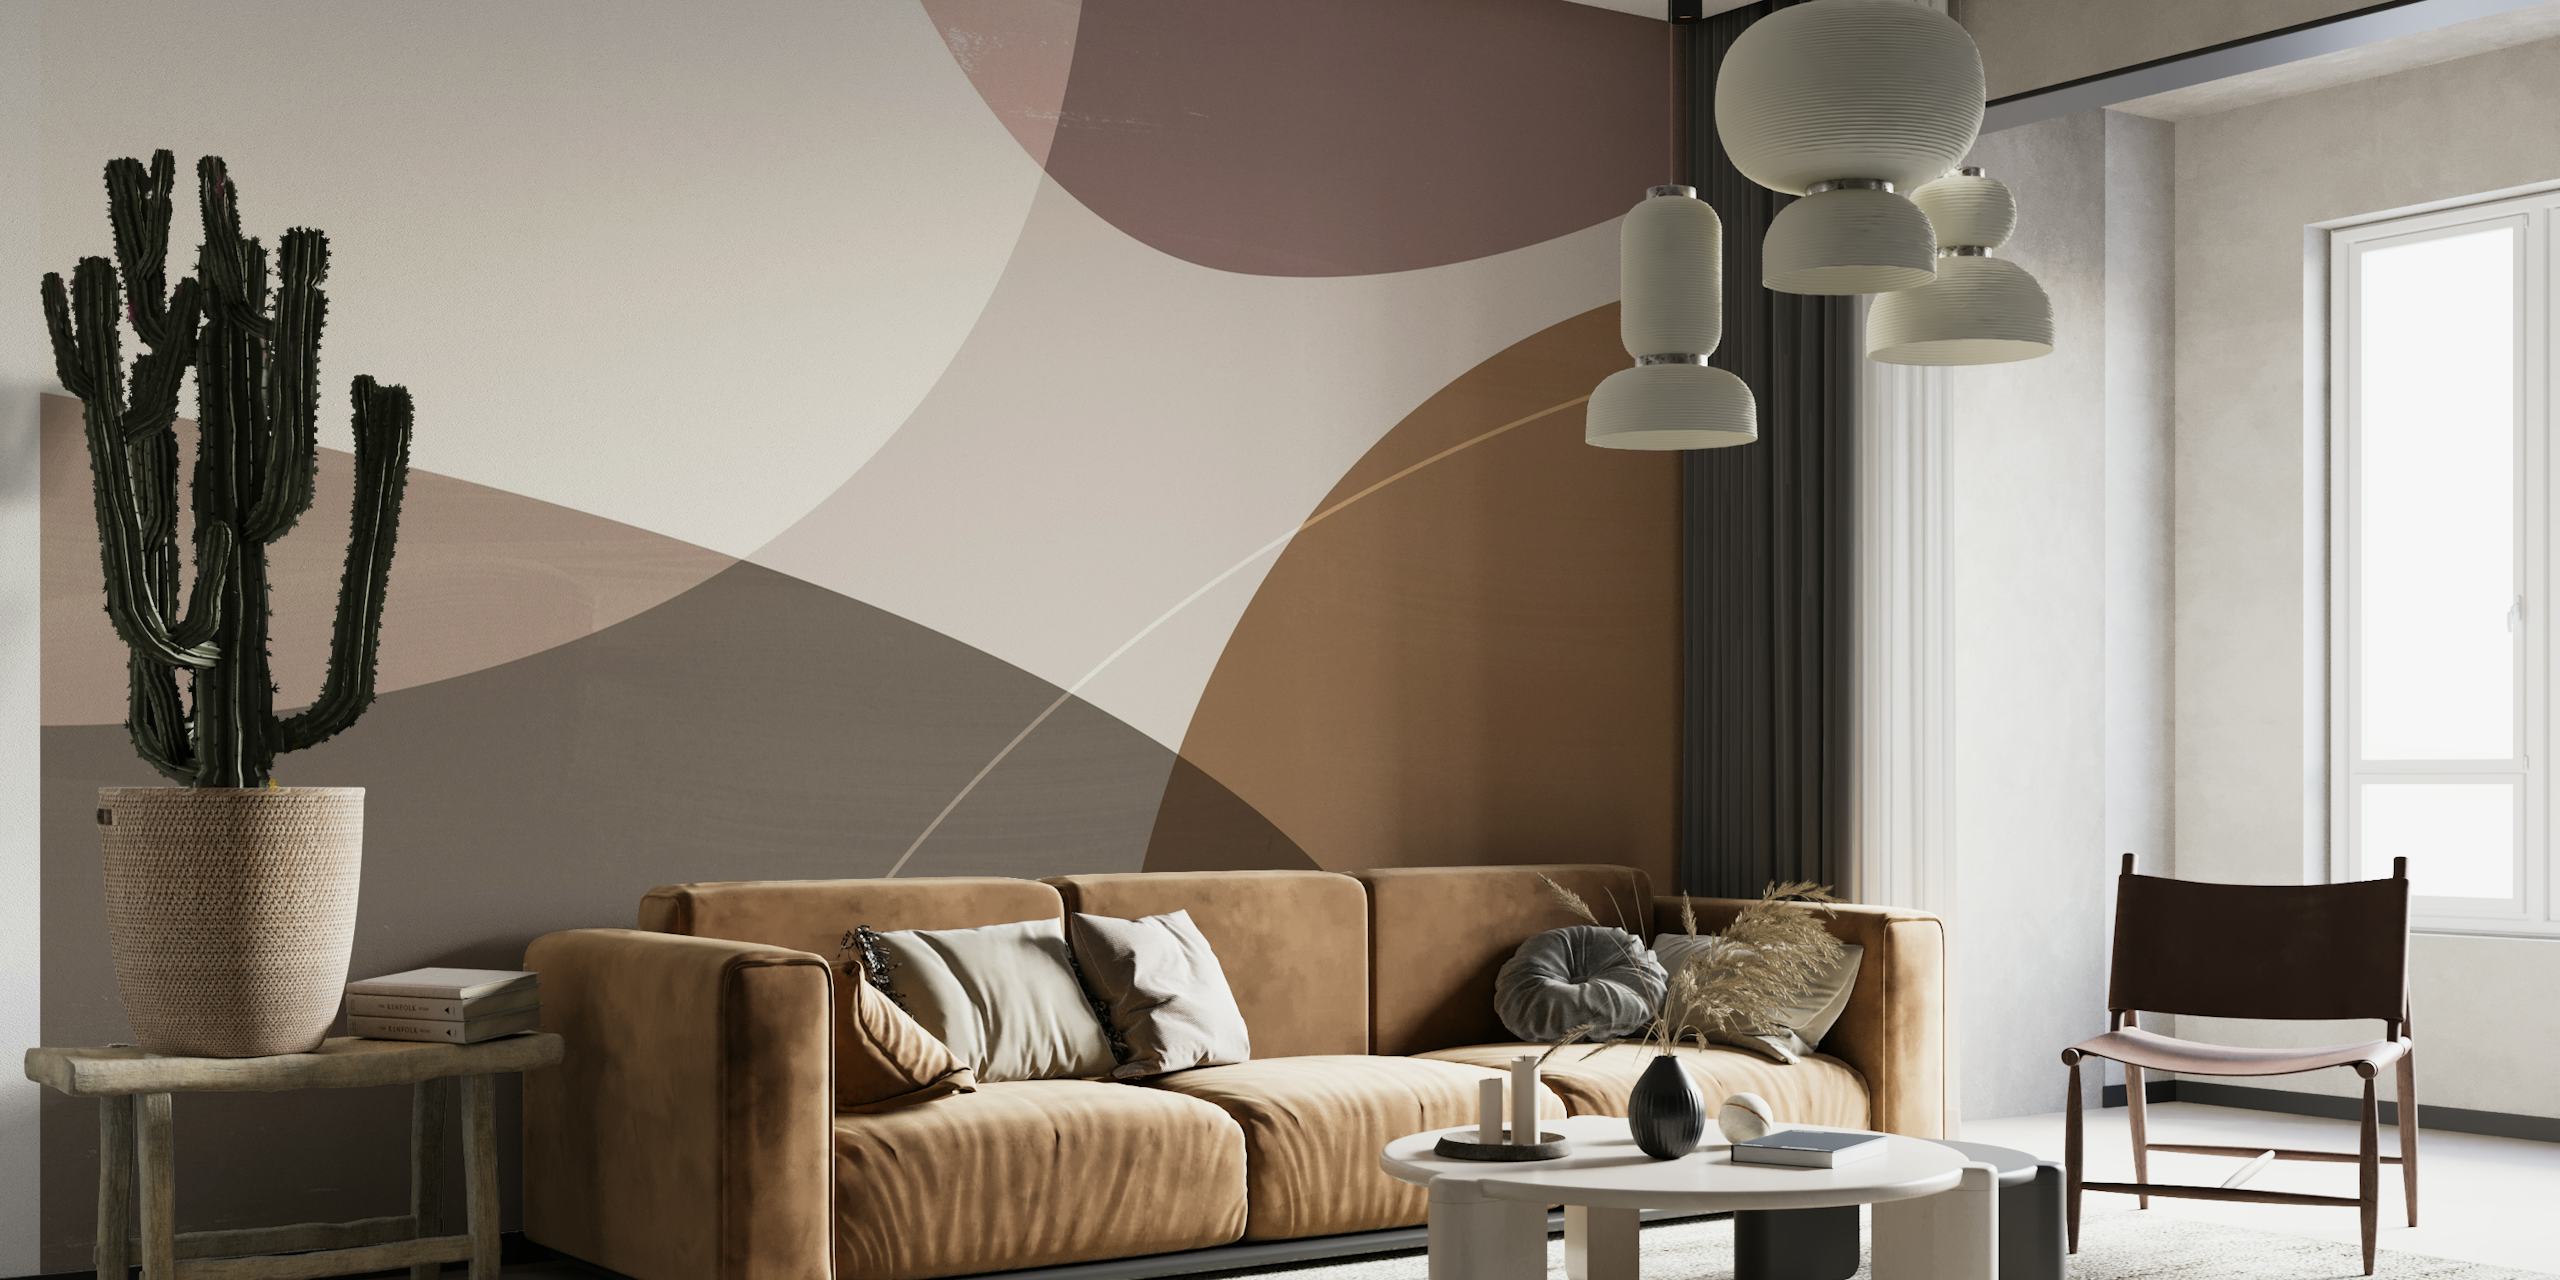 Abstract earthy colored shapes wall mural with taupe, beige, and brown tones